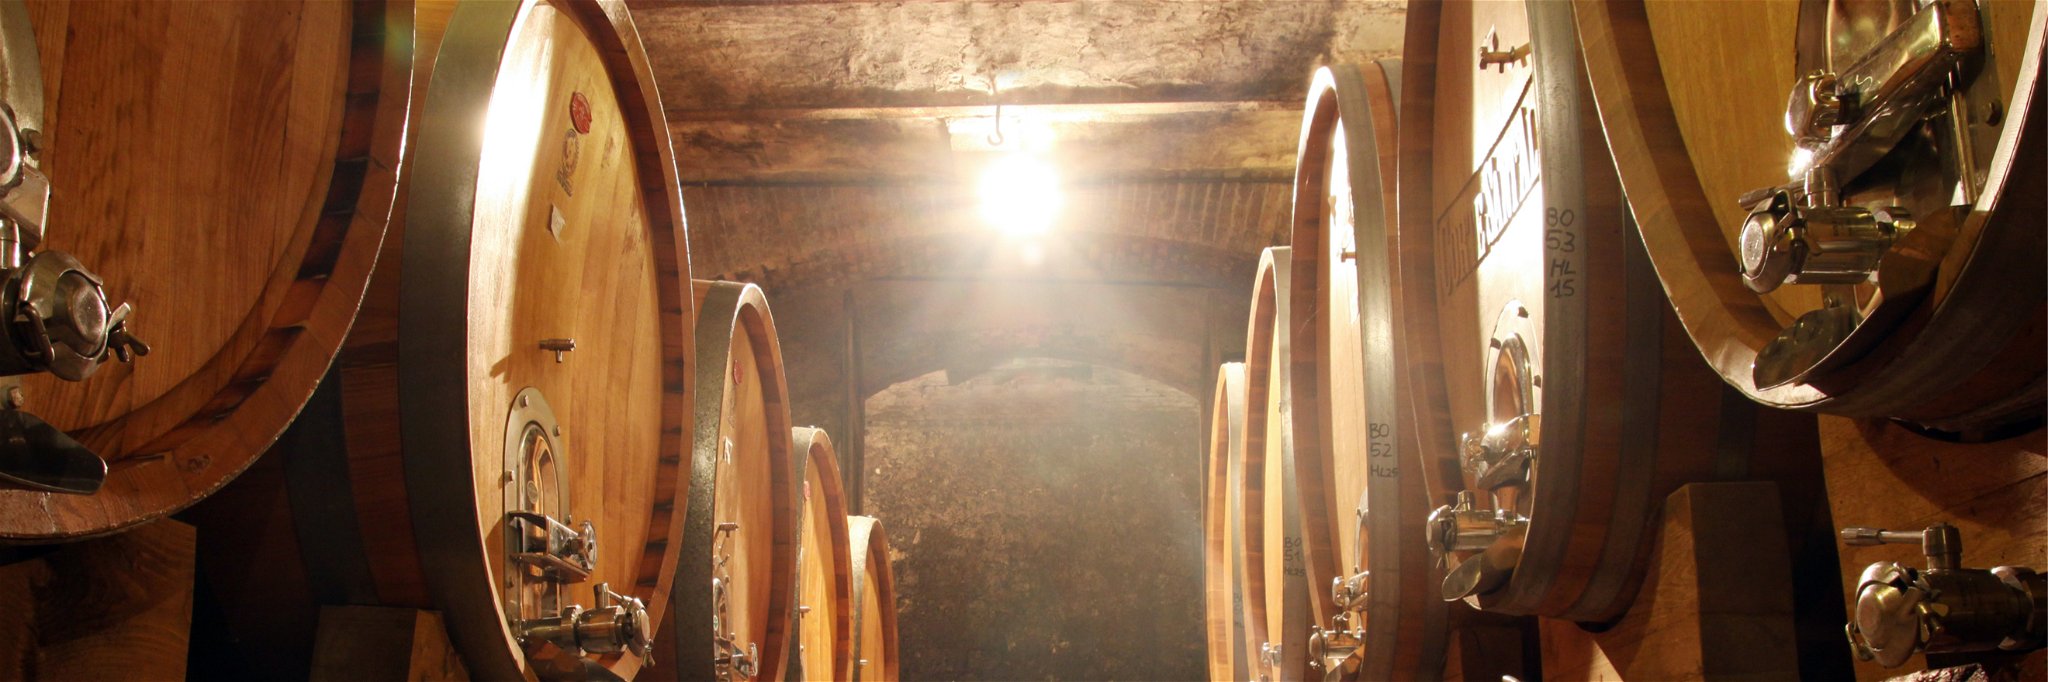 A traditional winery cellar